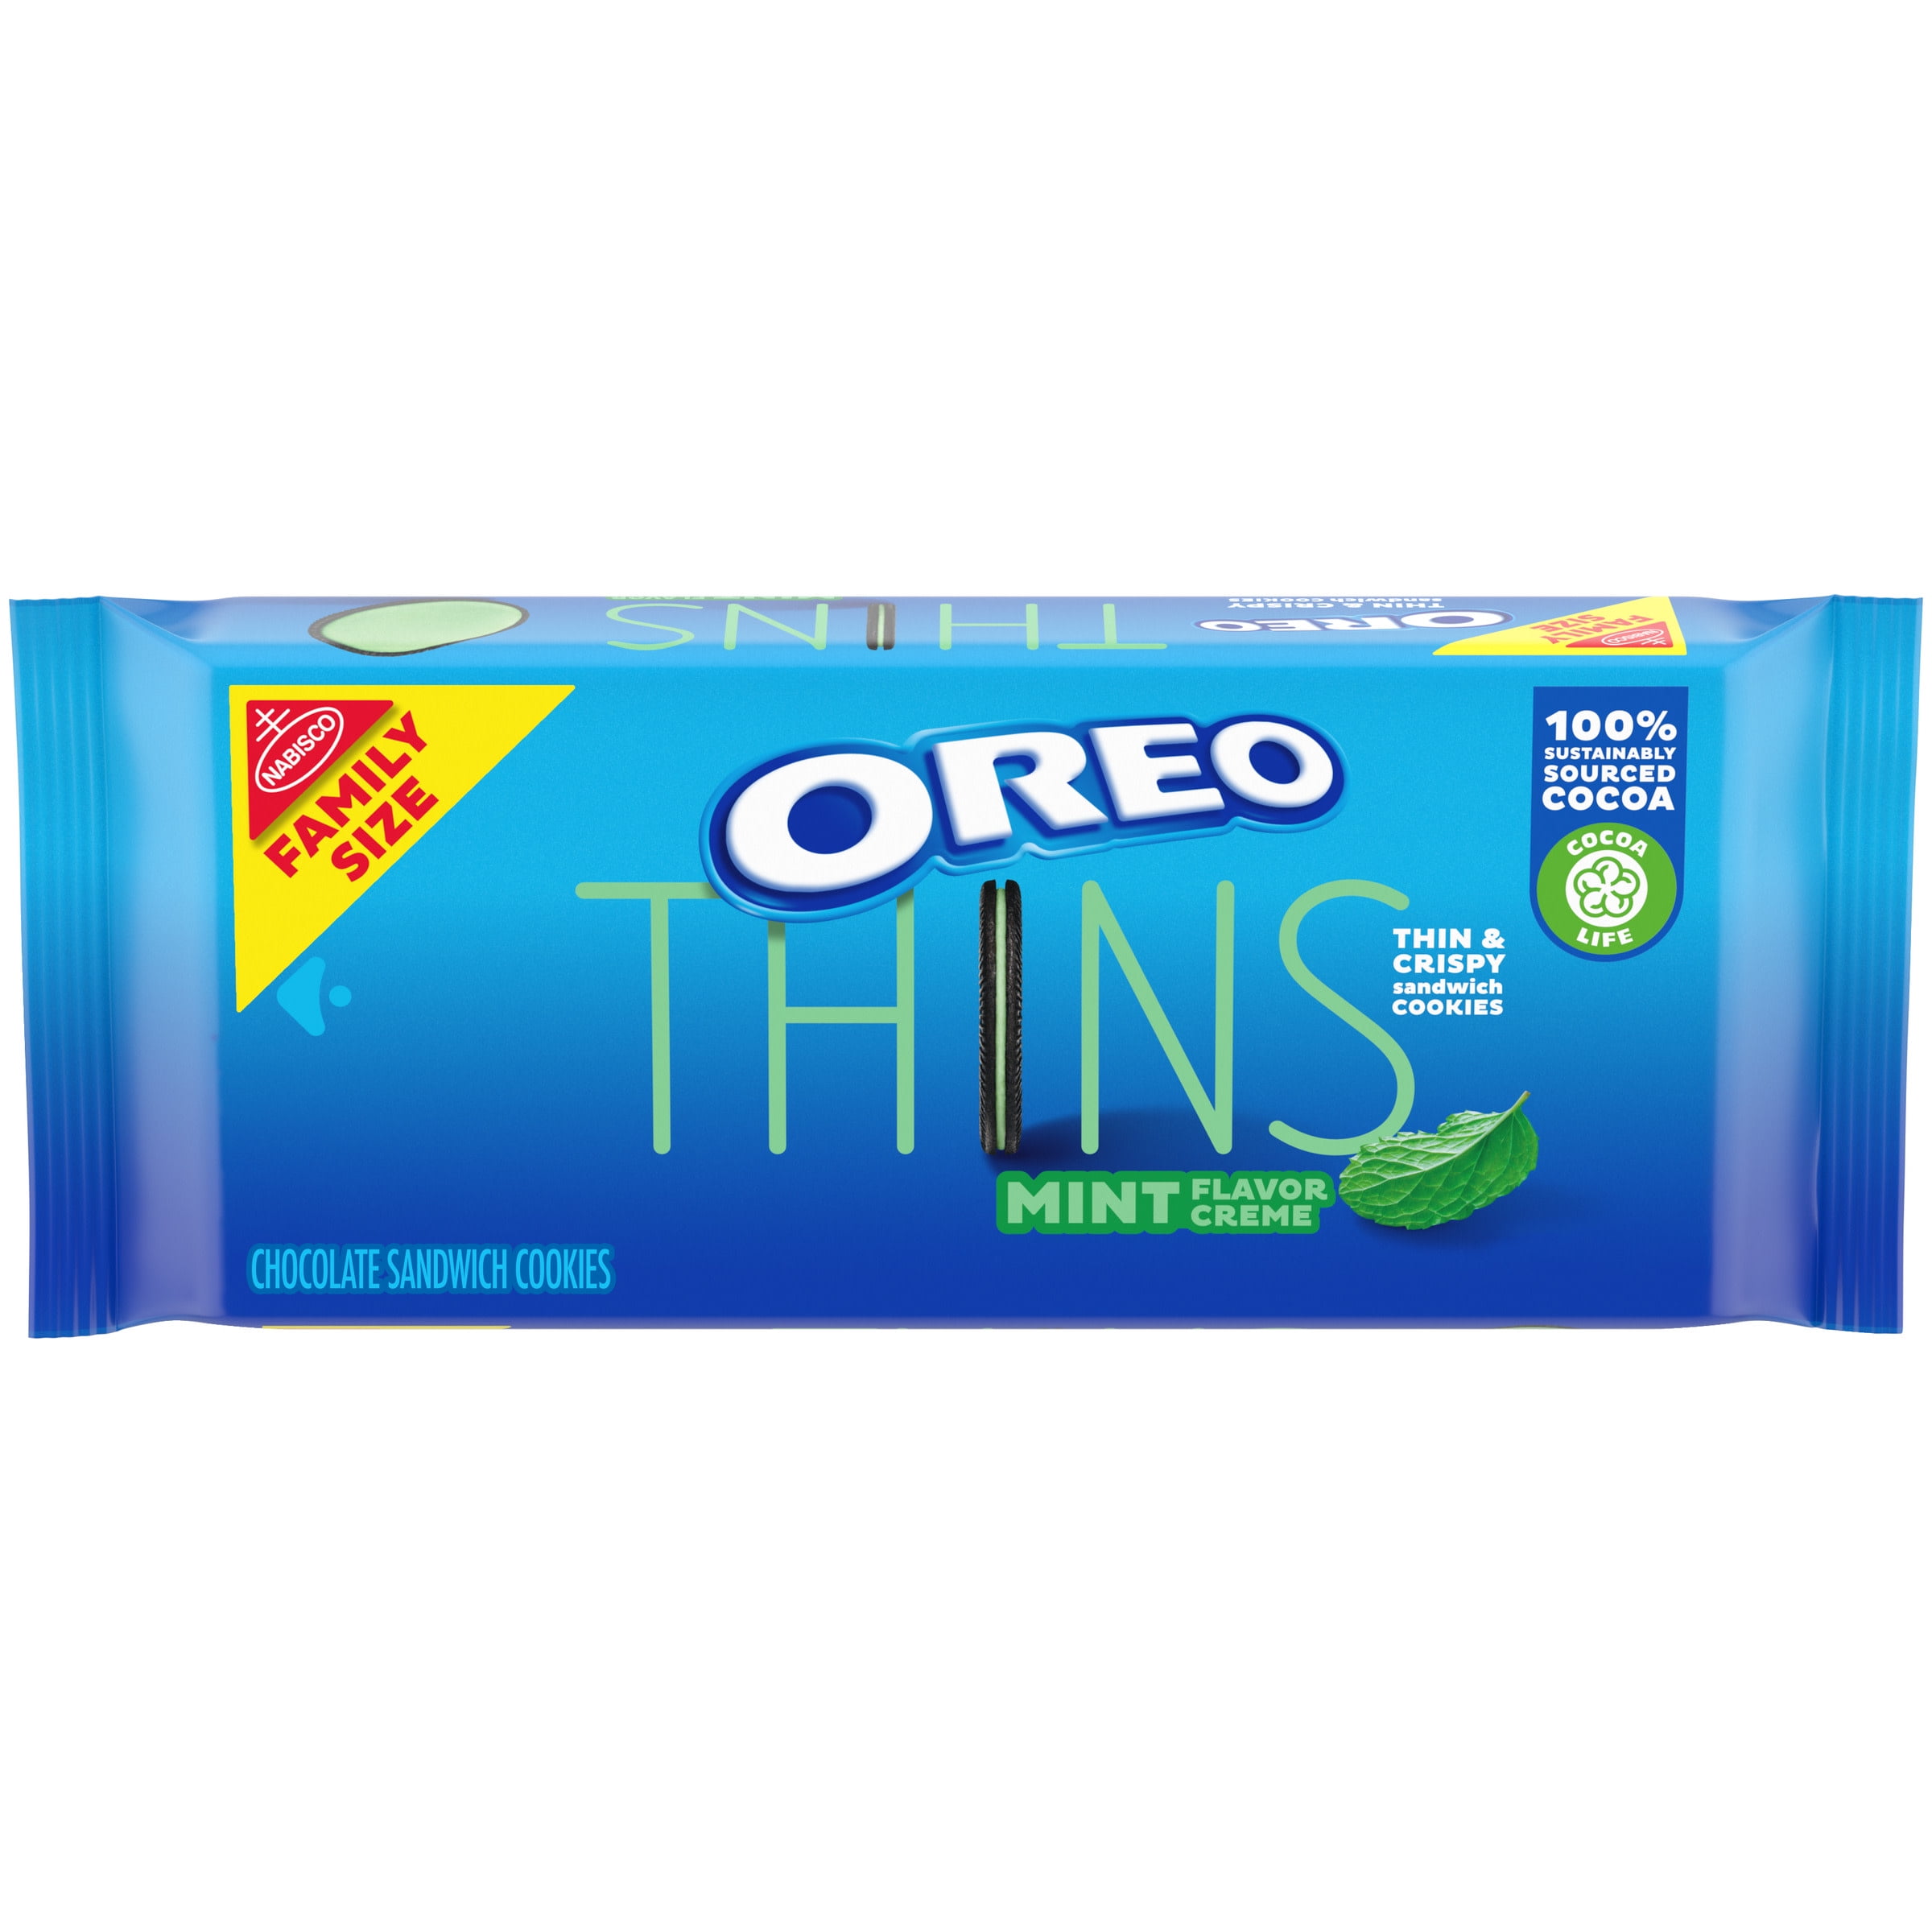 OREO Thins Mint Flavored Creme Chocolate Sandwich Cookies, Family Size, 13.1 oz